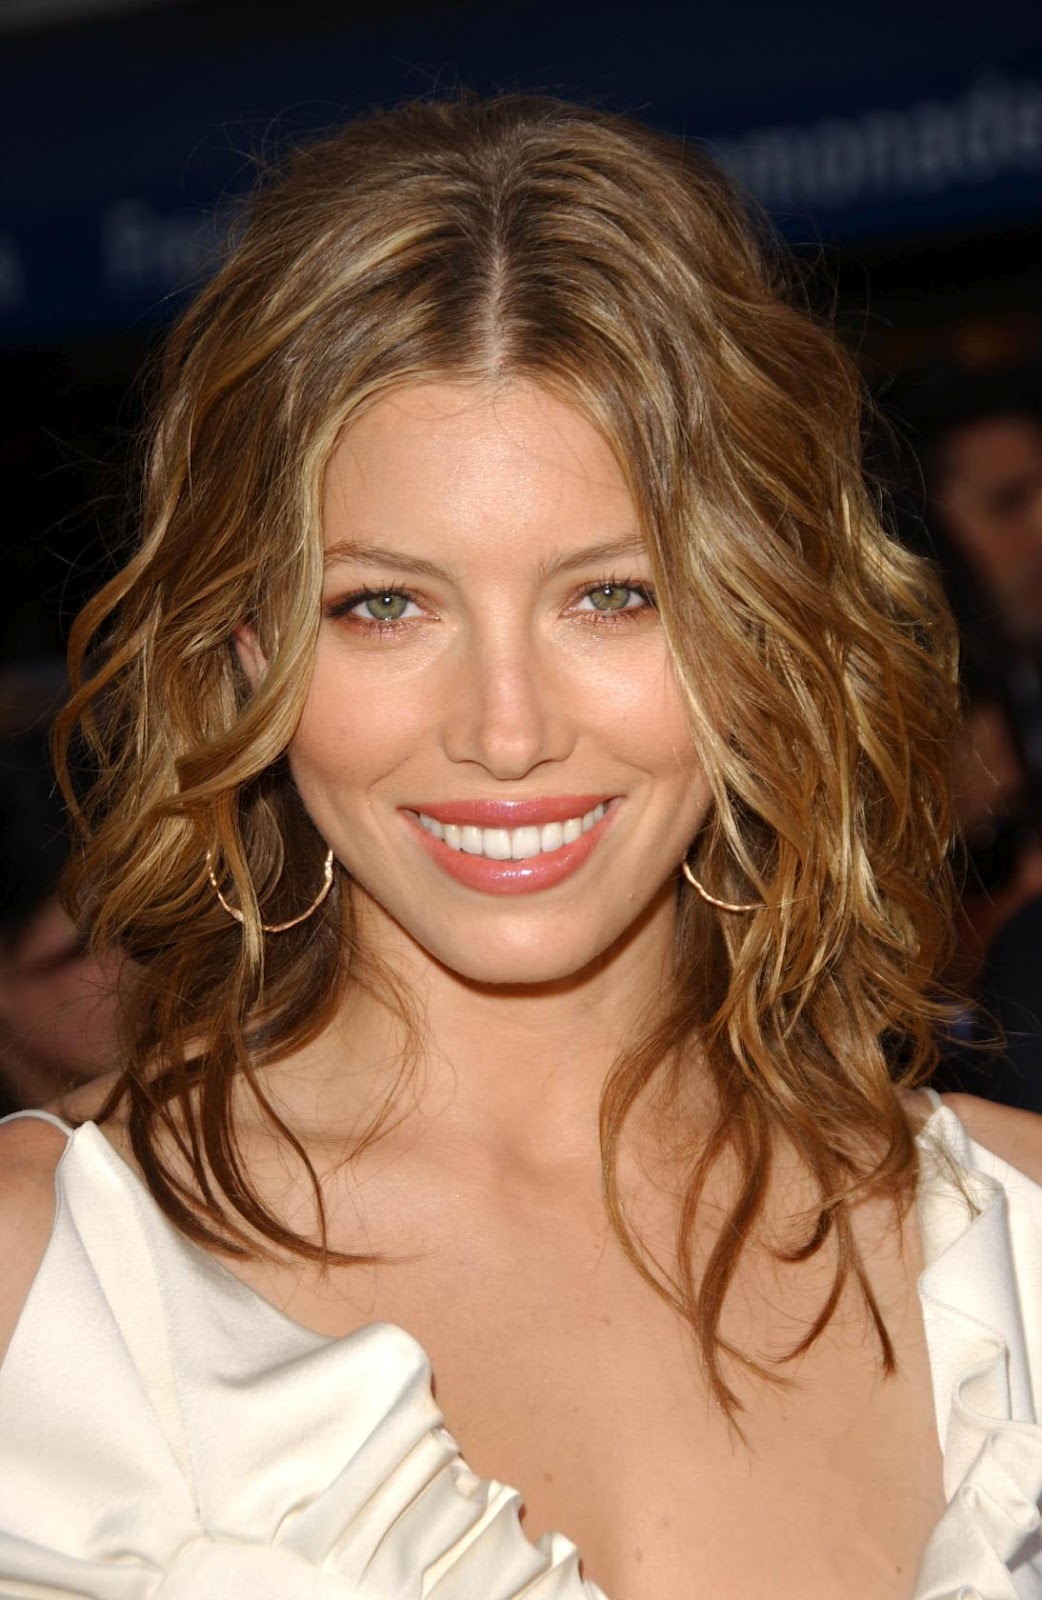 http://2.bp.blogspot.com/-nYtctQp2HsQ/T0P1_8wcrqI/AAAAAAAACbE/lsLdeIvKjN8/s1600/jessica-biel-beal-Actress-hairstyle-picture-photos-images-jessica-film-modeling-acting%2B%25252829%252529.jpg